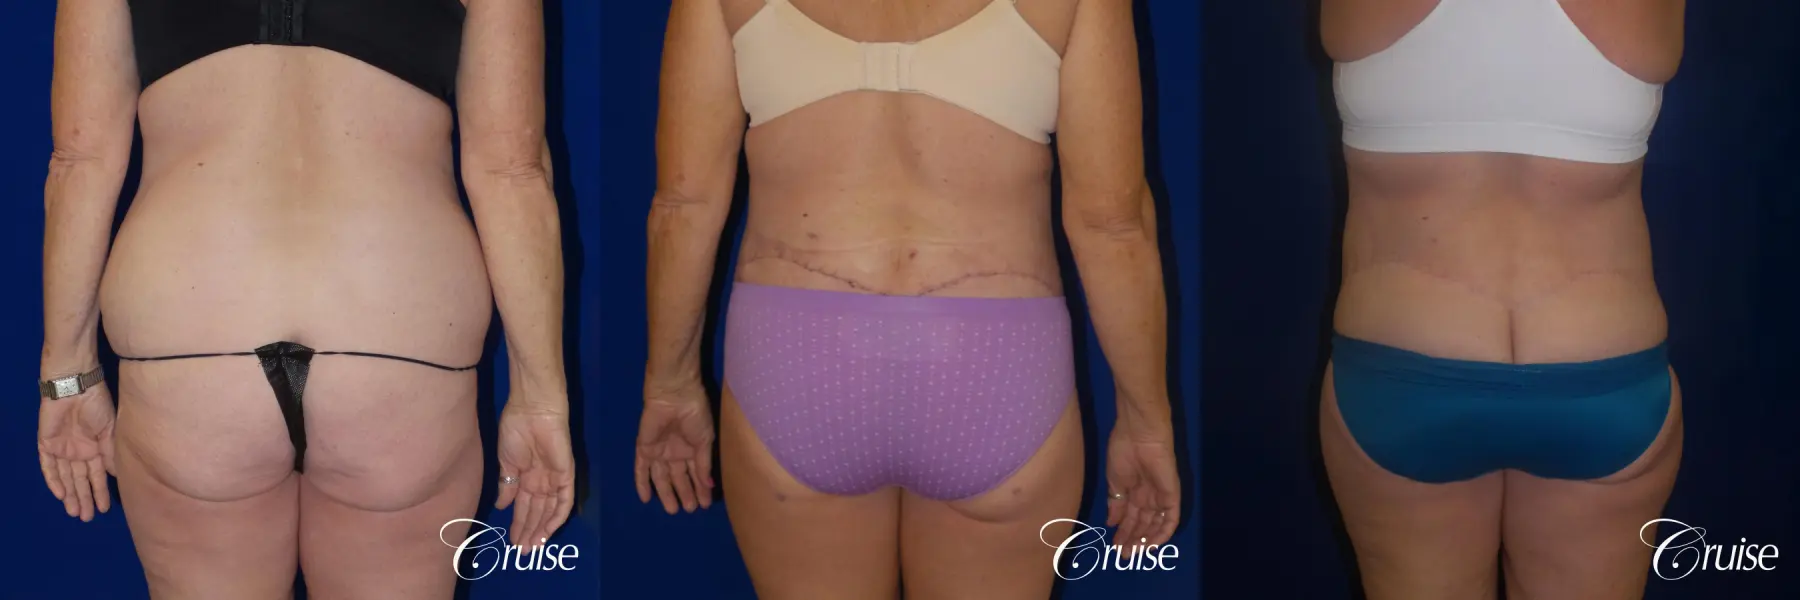 Tummy Tuck Before & After Gallery: Patient 2